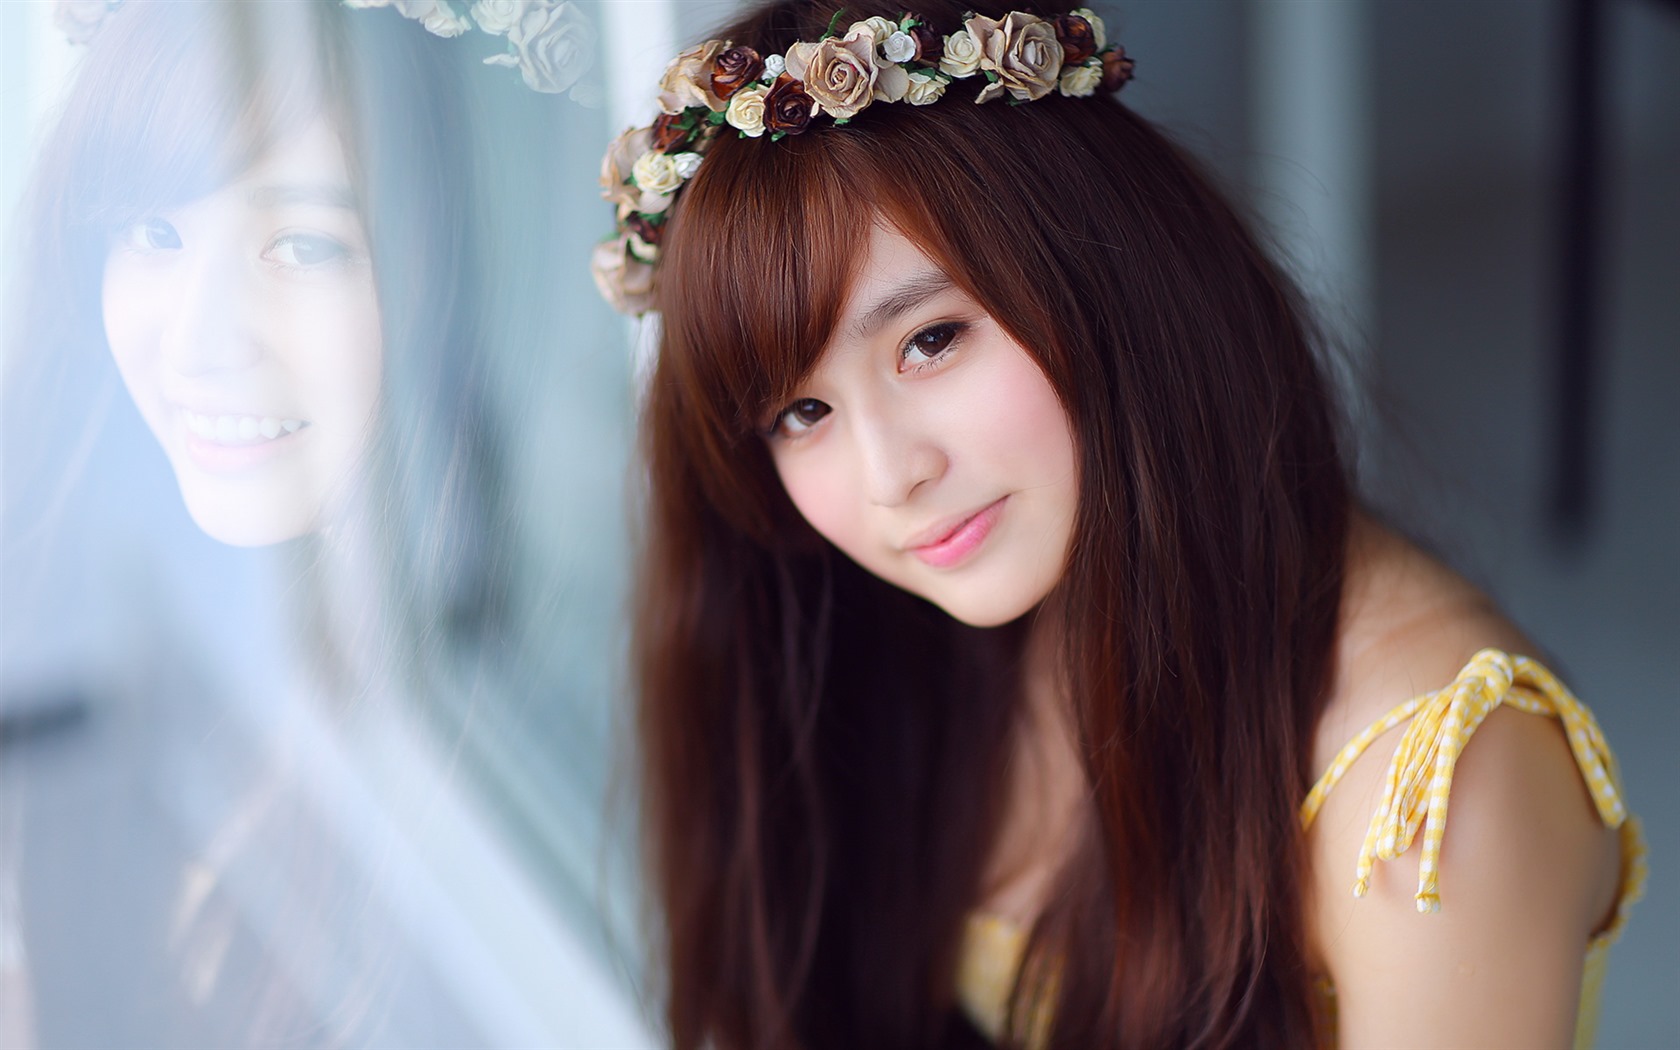 Pure and lovely young Asian girl HD wallpapers collection (3) #9 - 1680x1050